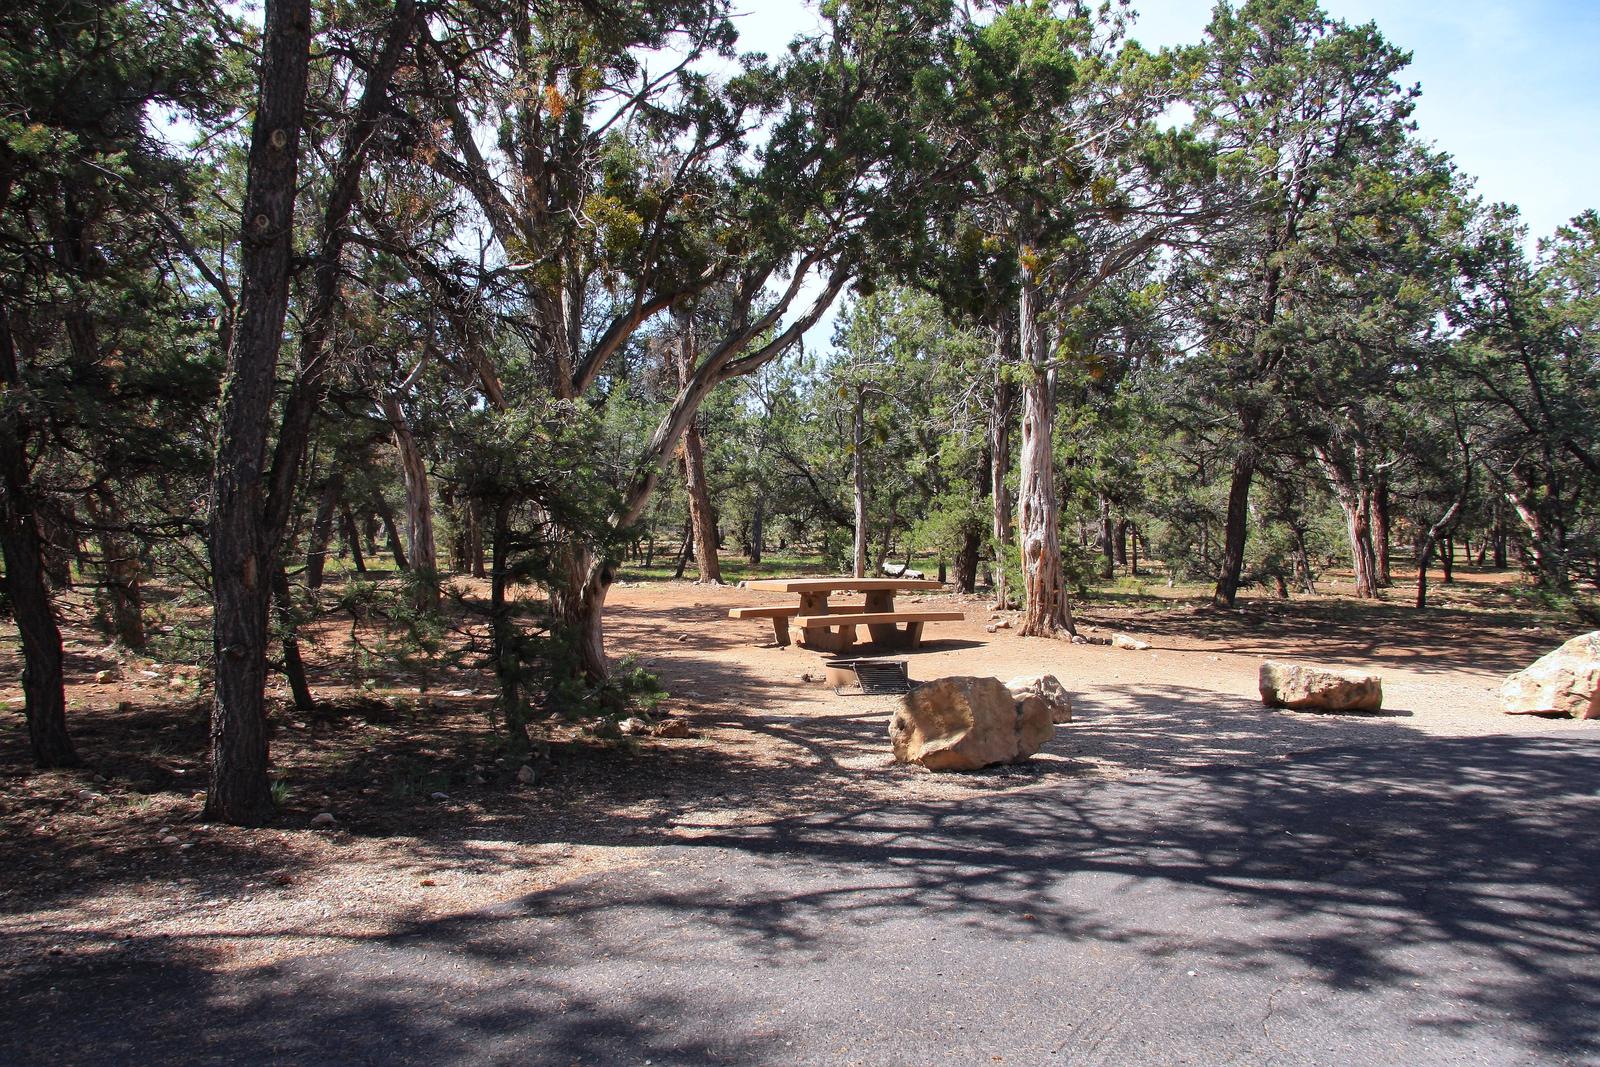 Picnic table, fire pit, and parking spot, Mather CampgroundPicnic table, fire pit, and parking spot for Maple Loop 192, Mather Campground